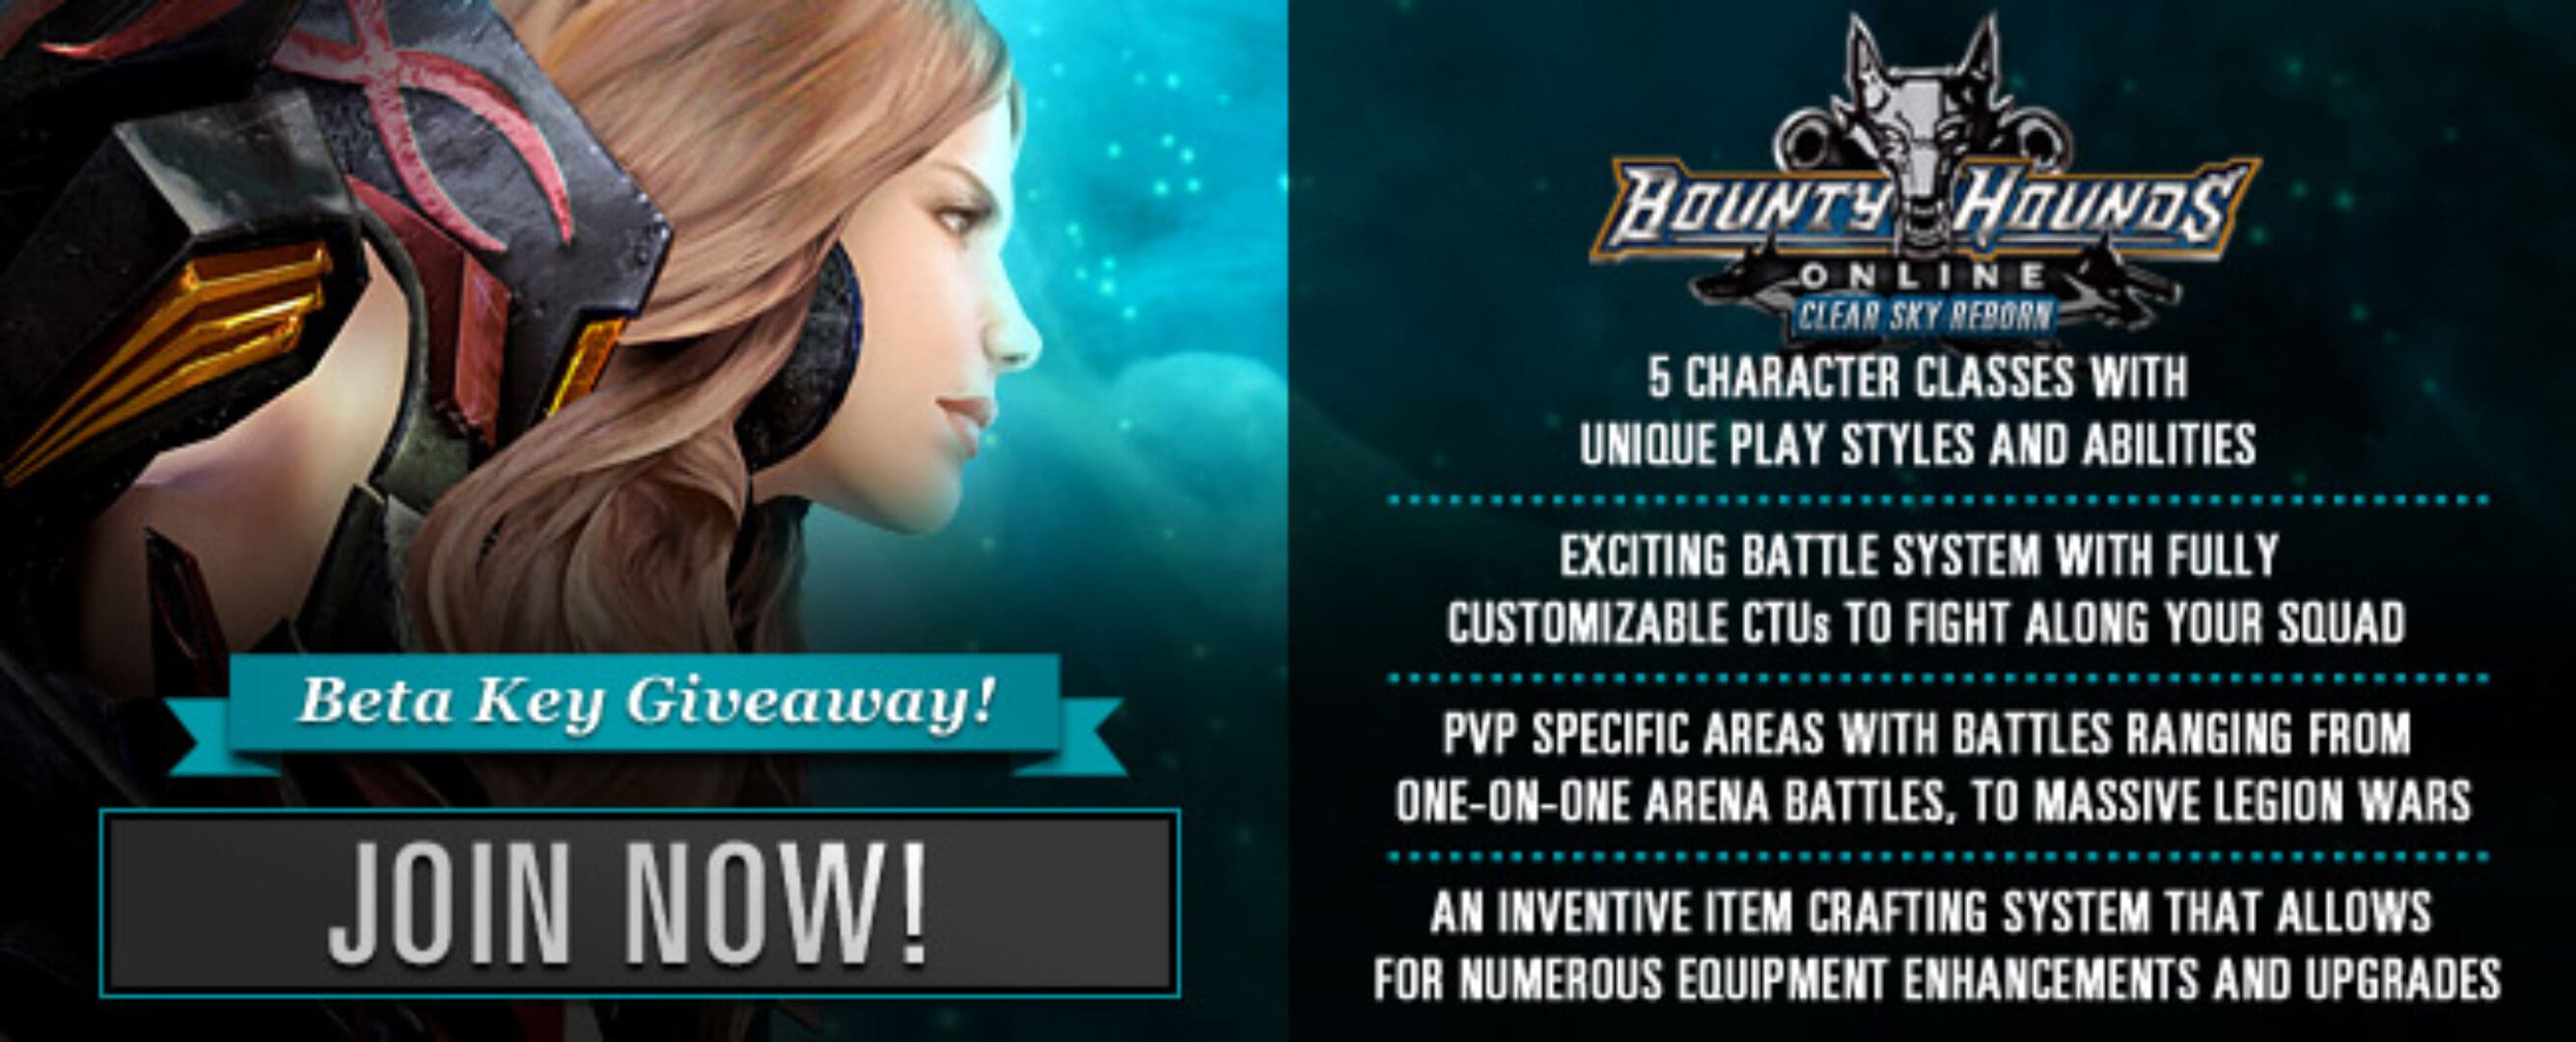 Bounty Hounds Online Closed Beta Giveaway